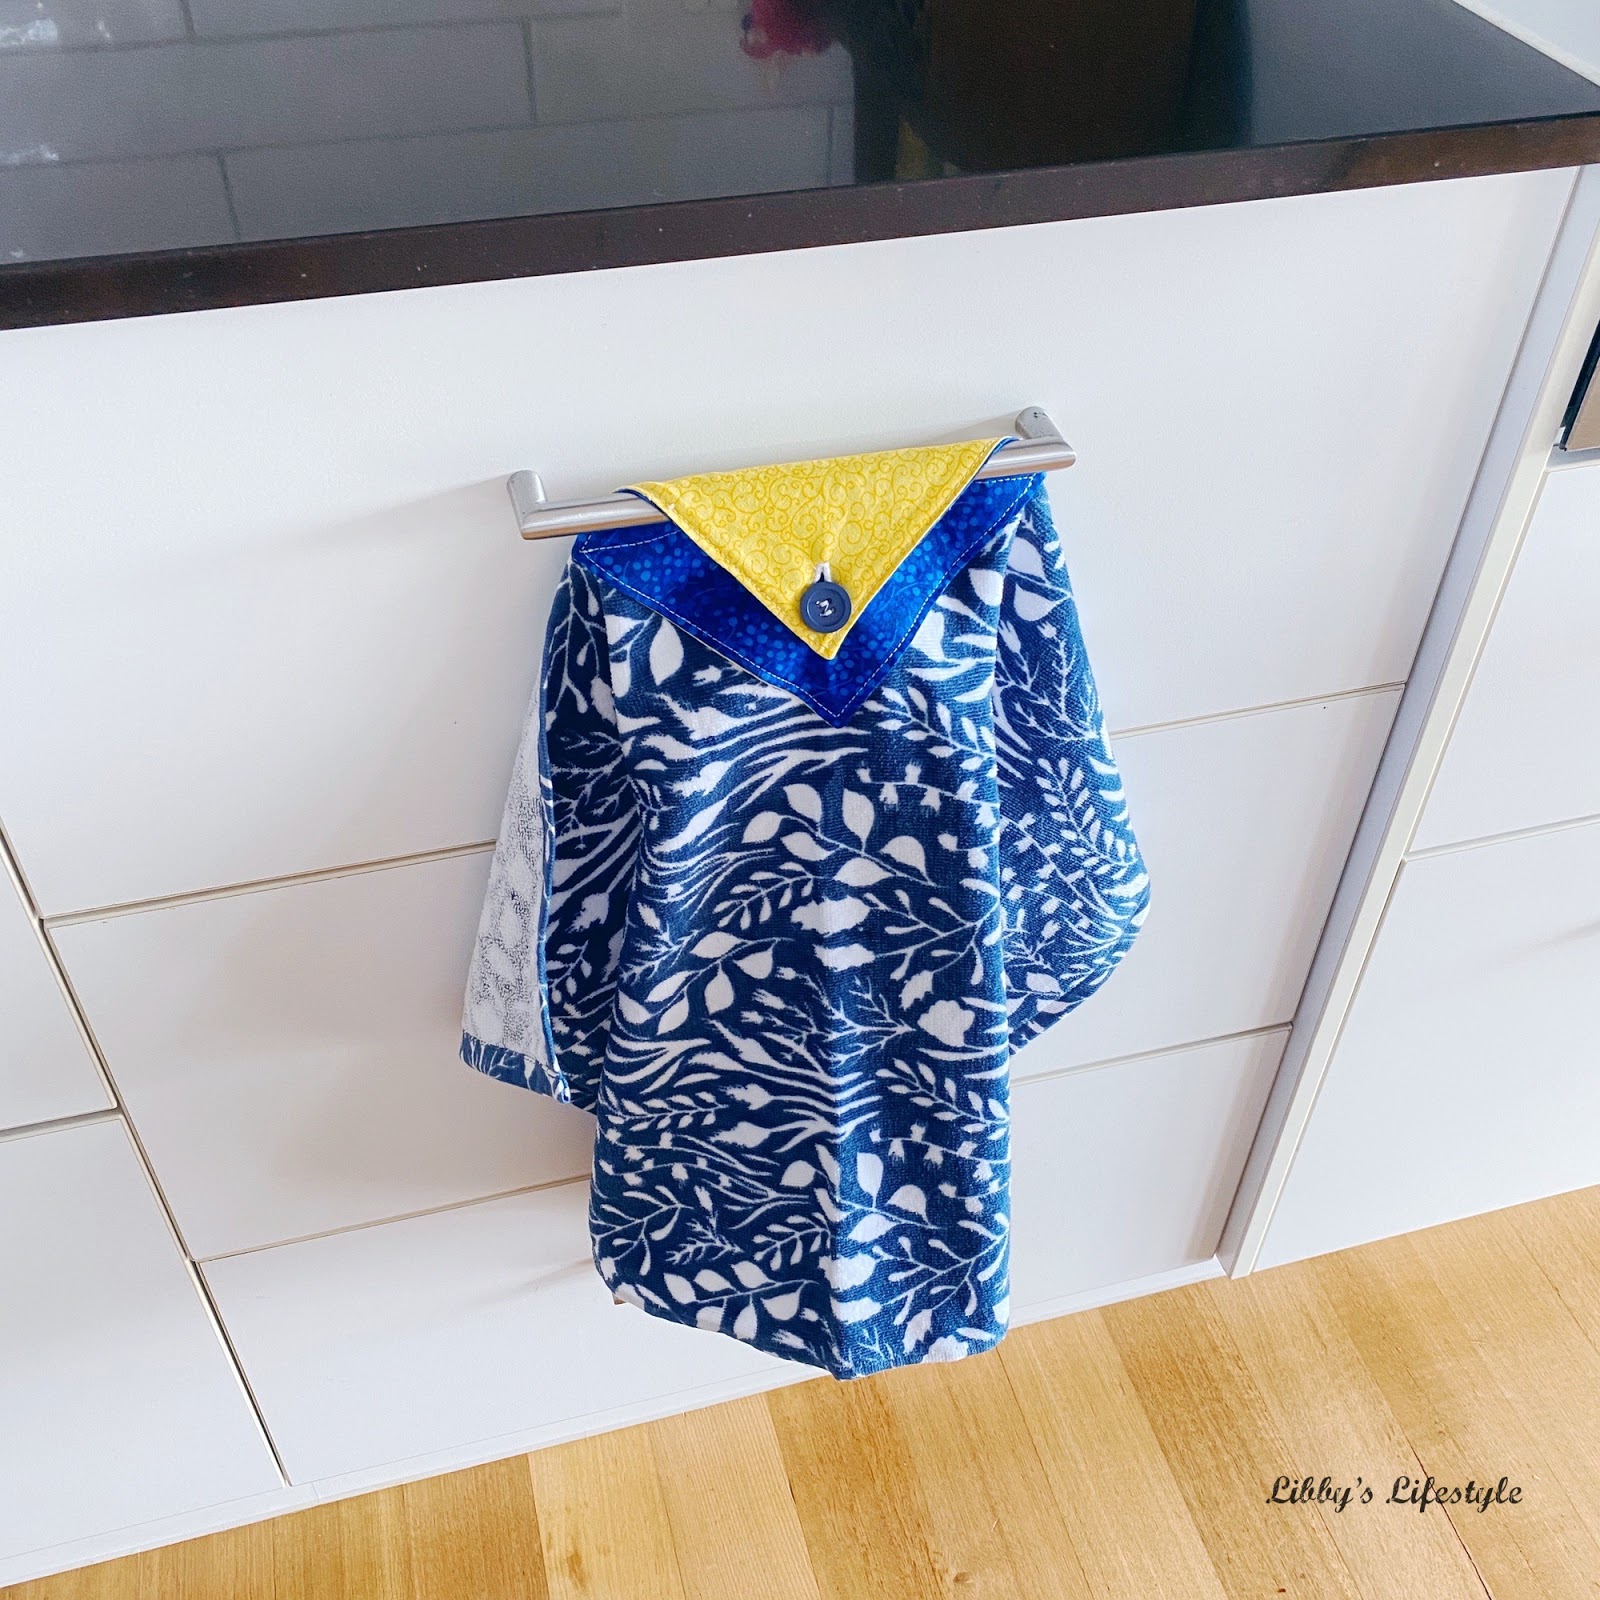 Libby's Lifestyle.: My modern style hanging kitchen towel tutorial.